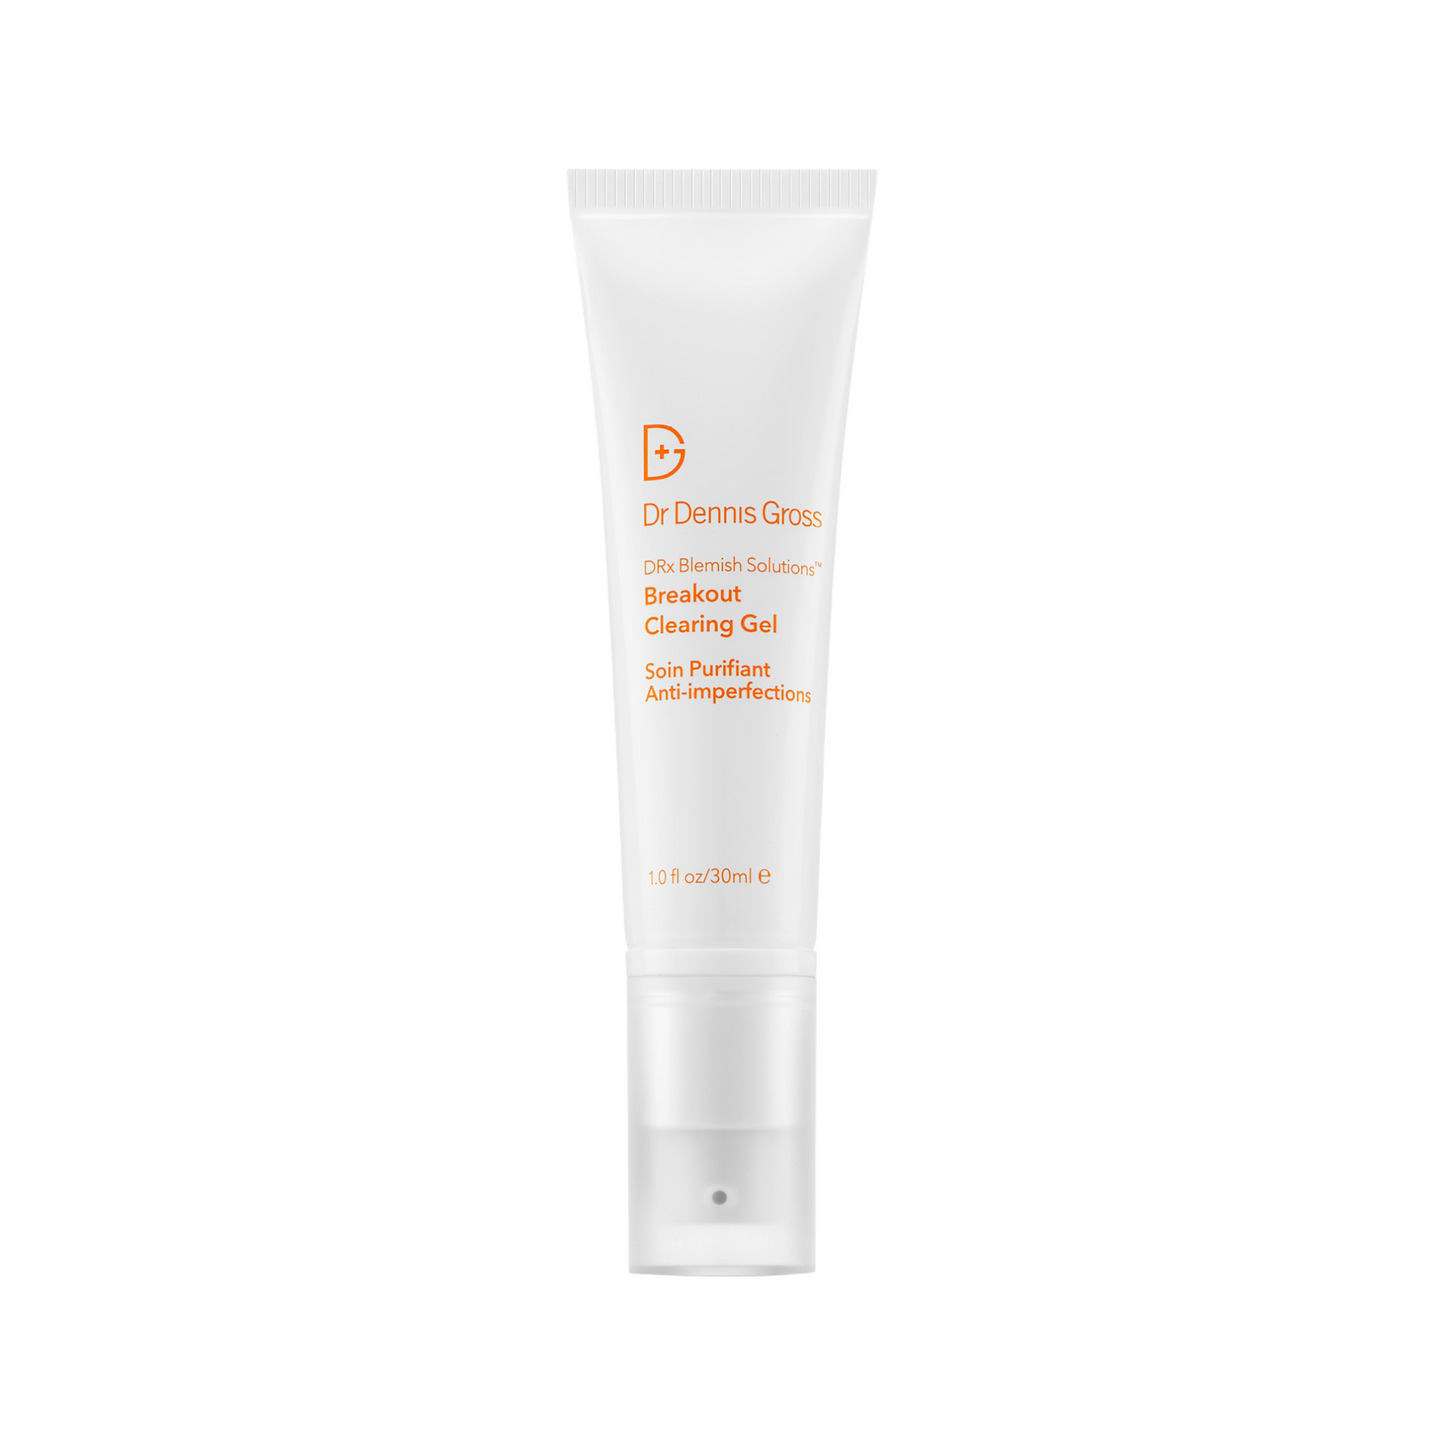 DRx Blemish Solution Breakout Clearing Gel